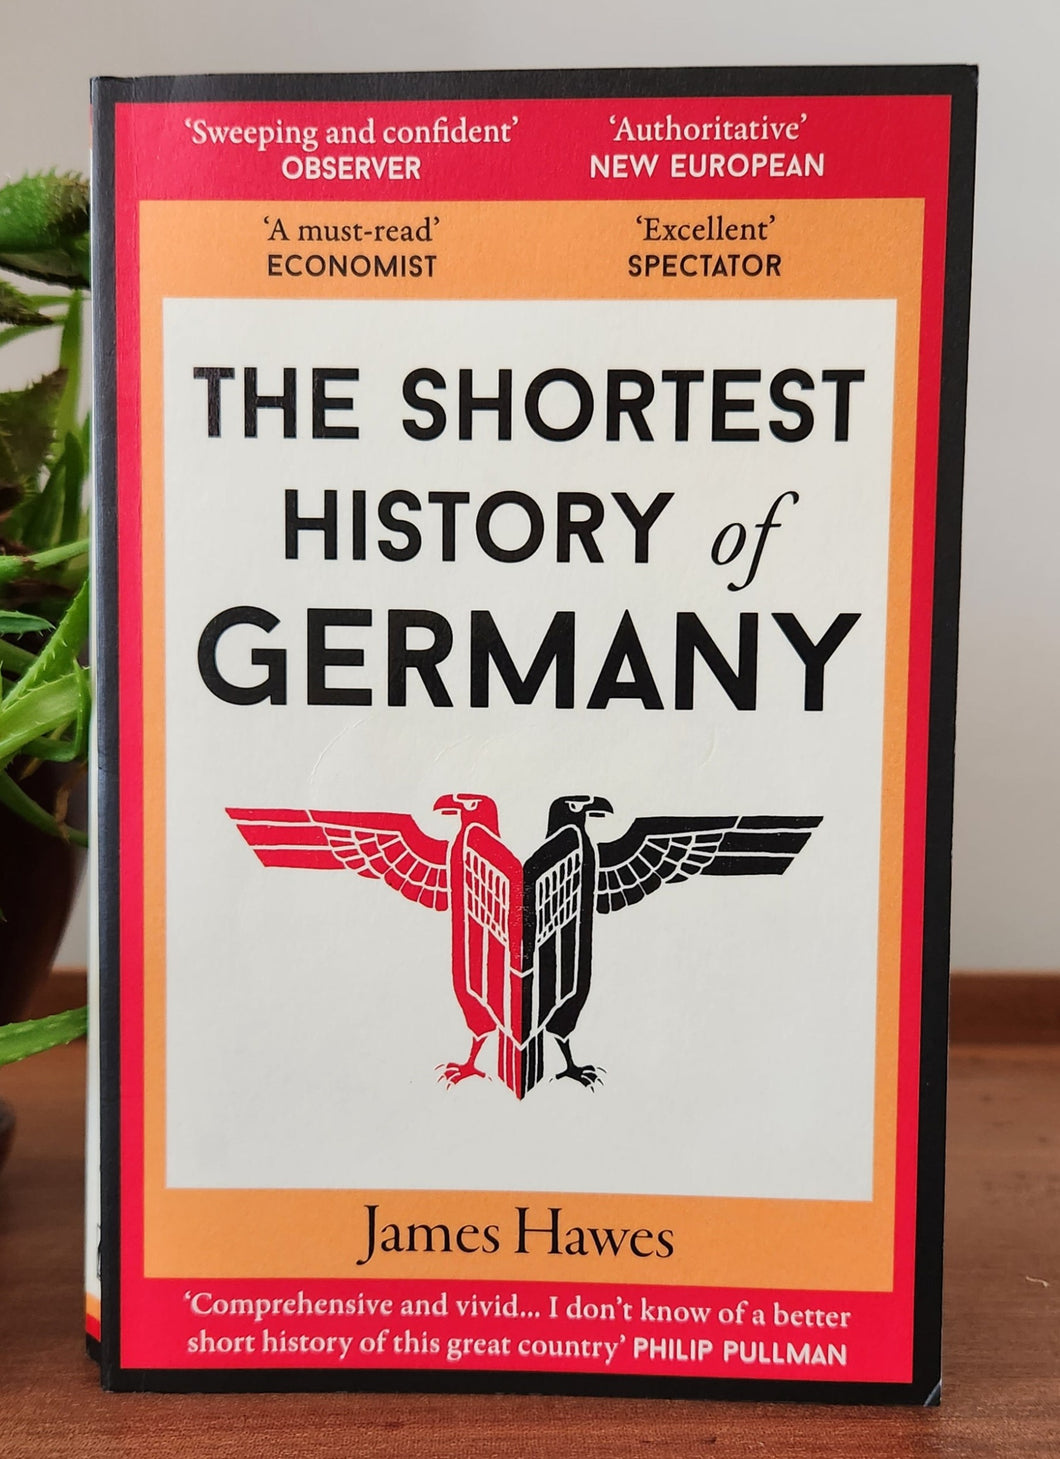 The Shortest History of Germany by James Hawes